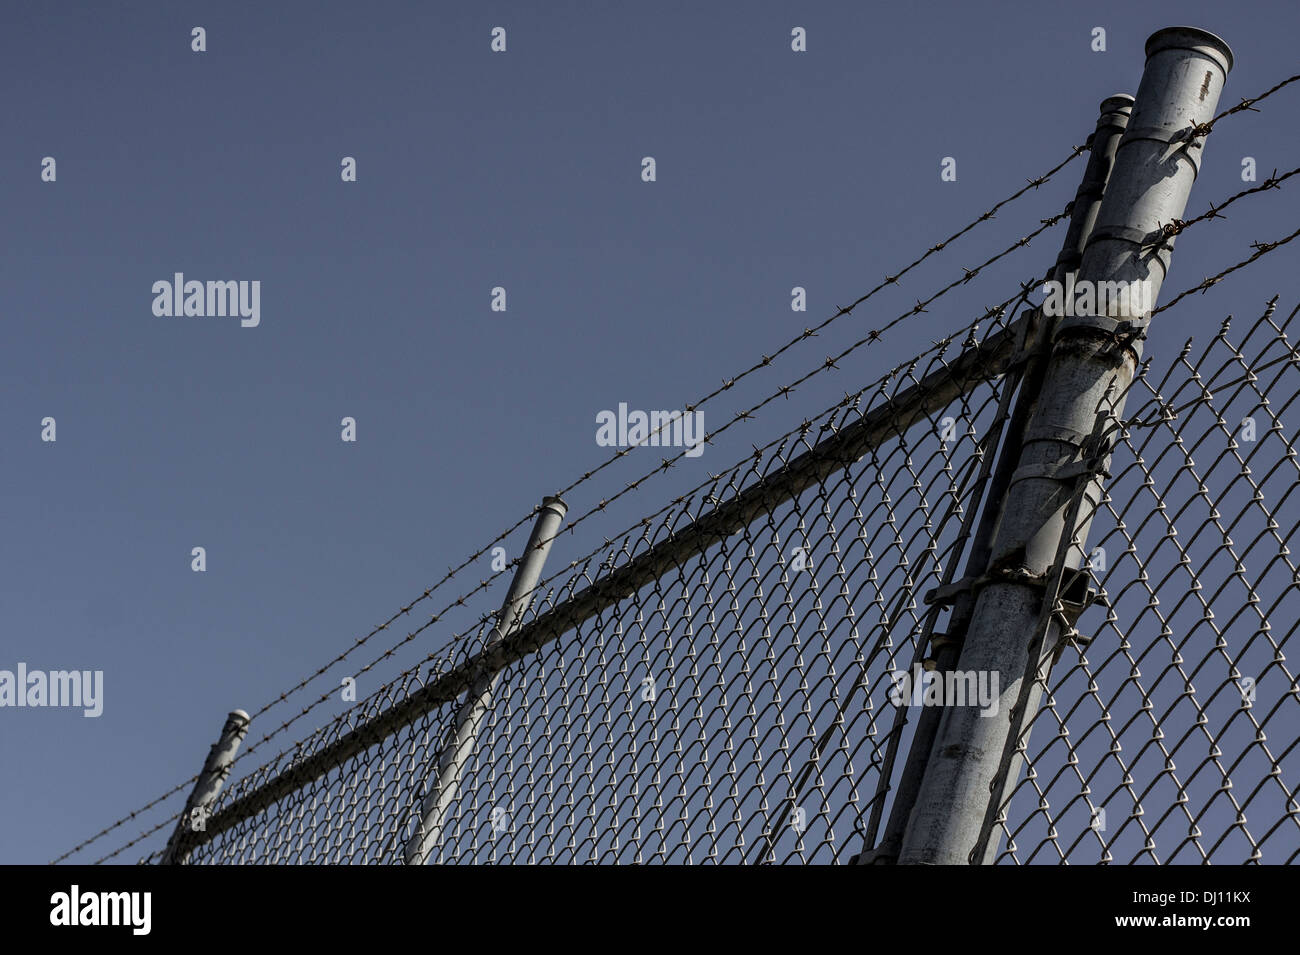 Chain link fence with barbed wire Stock Photo